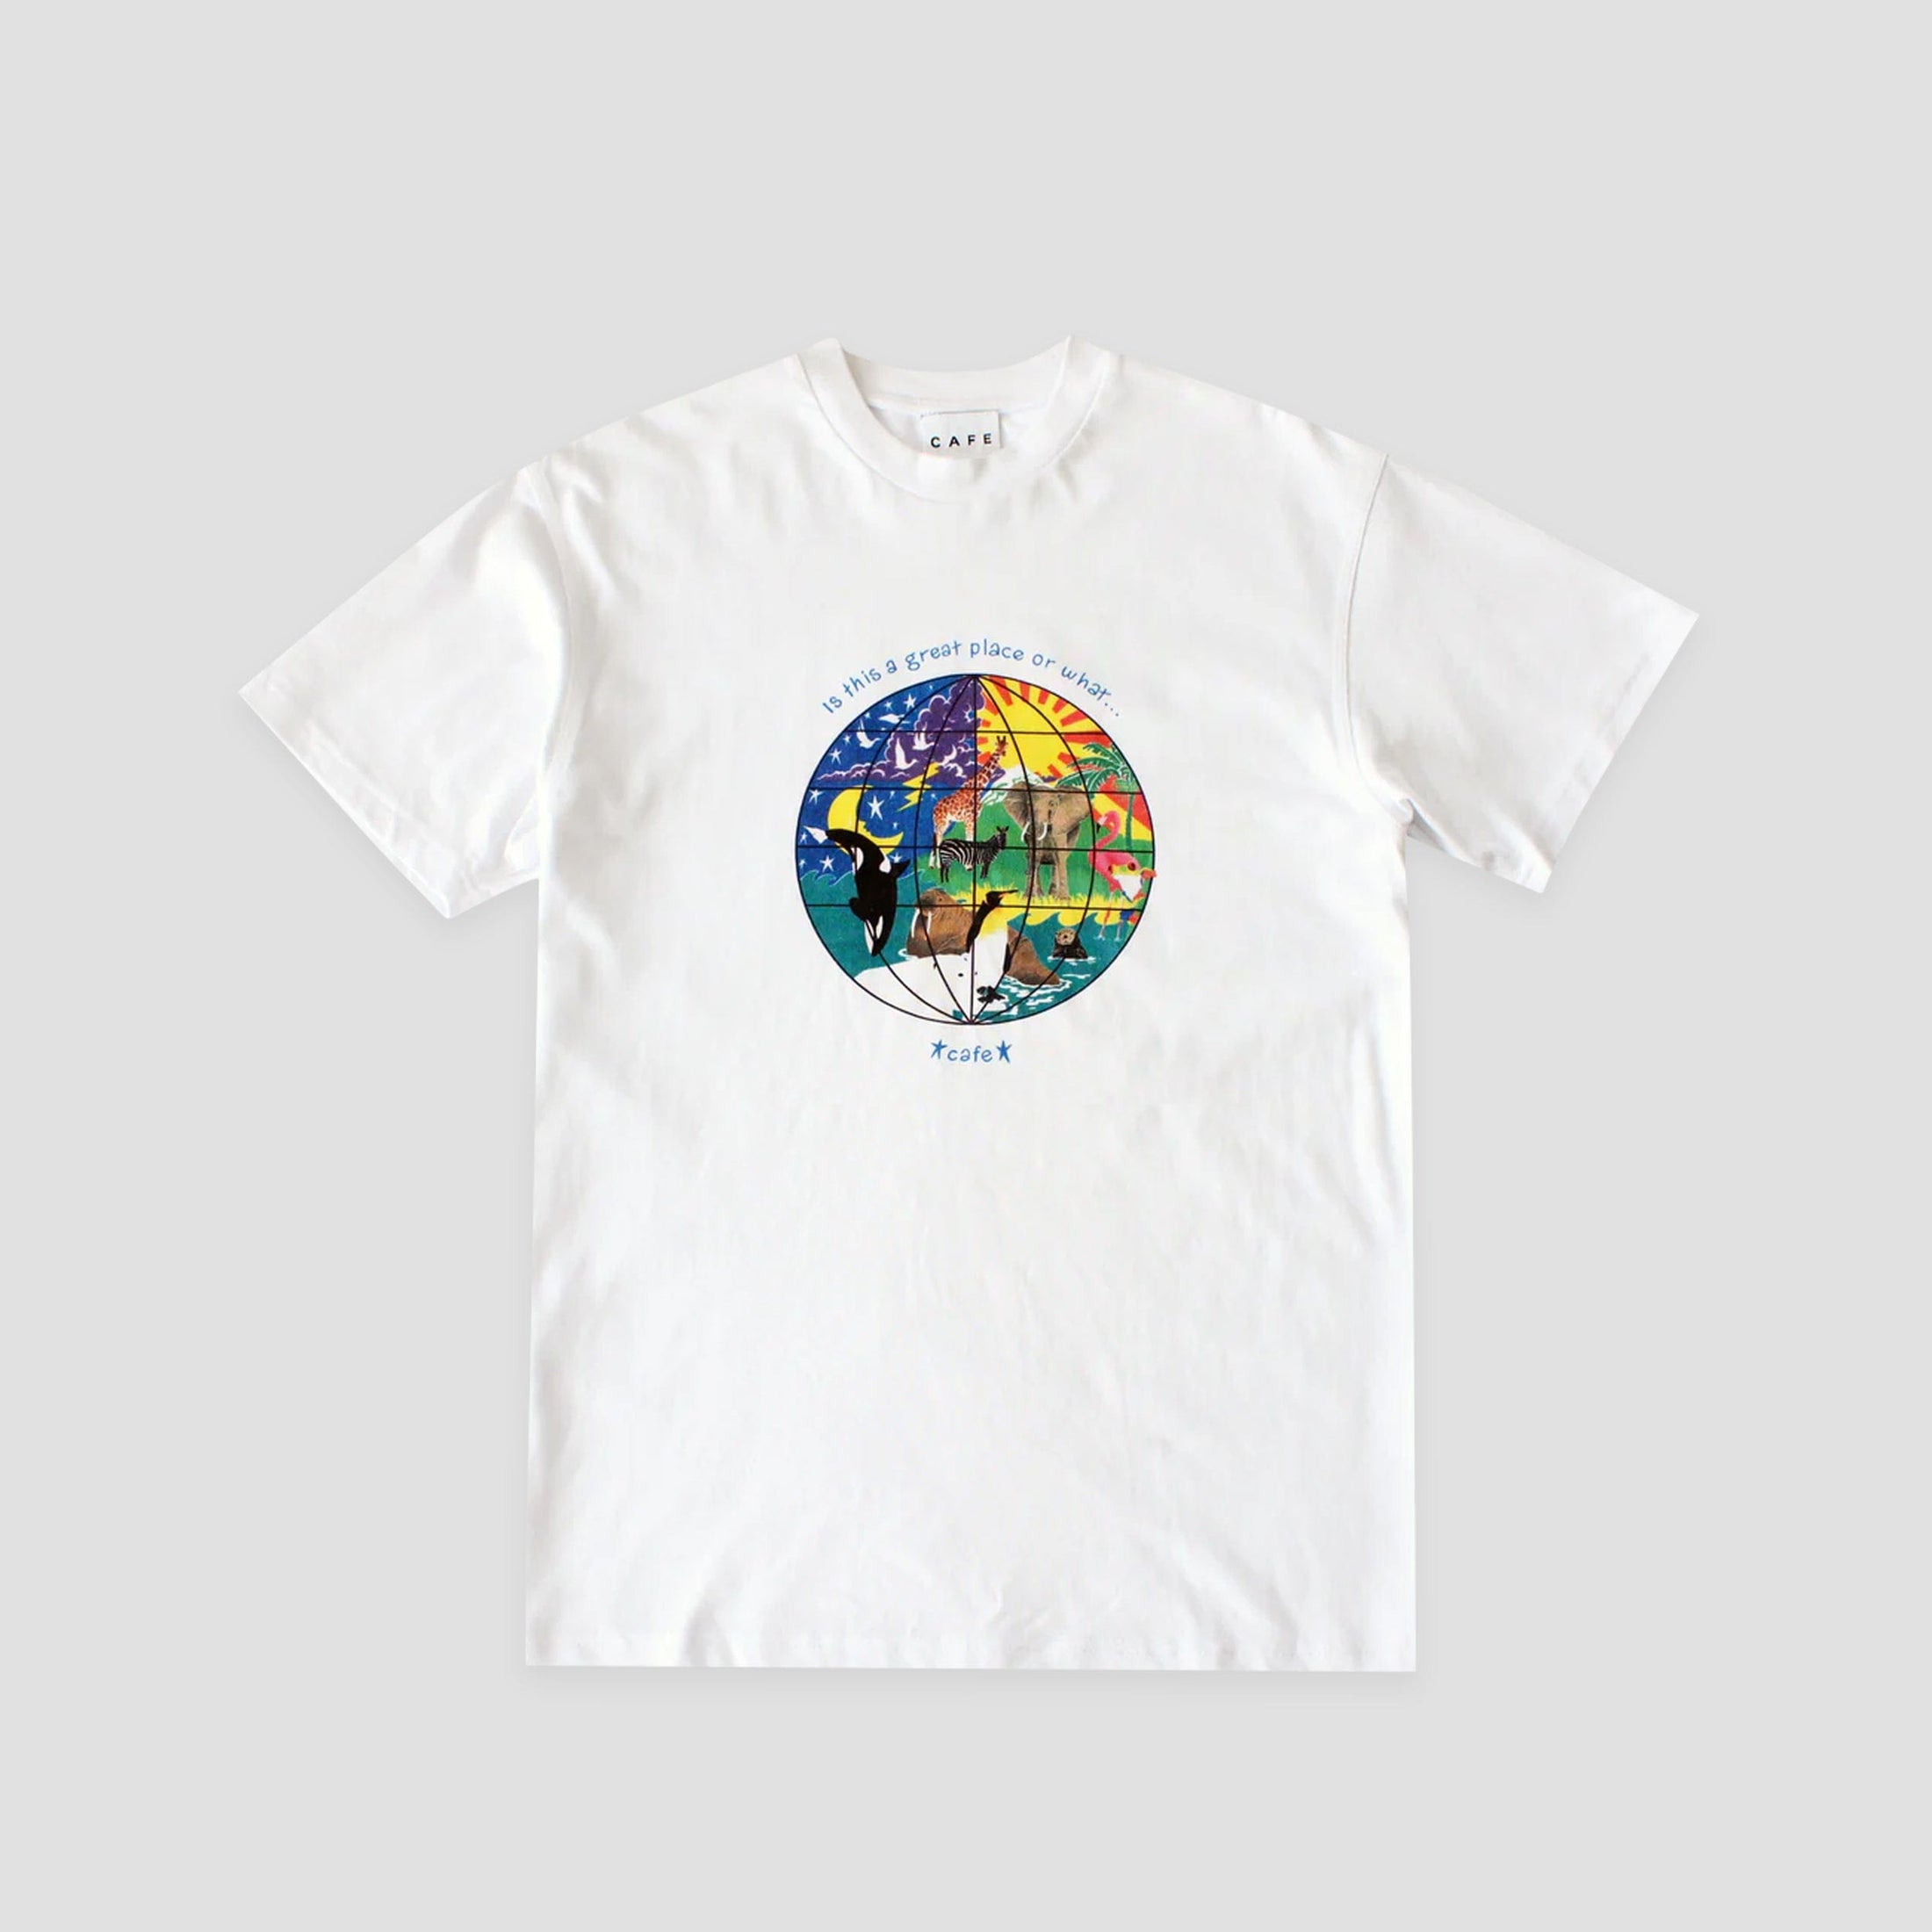 Skateboard Cafe Great Place T-Shirt White